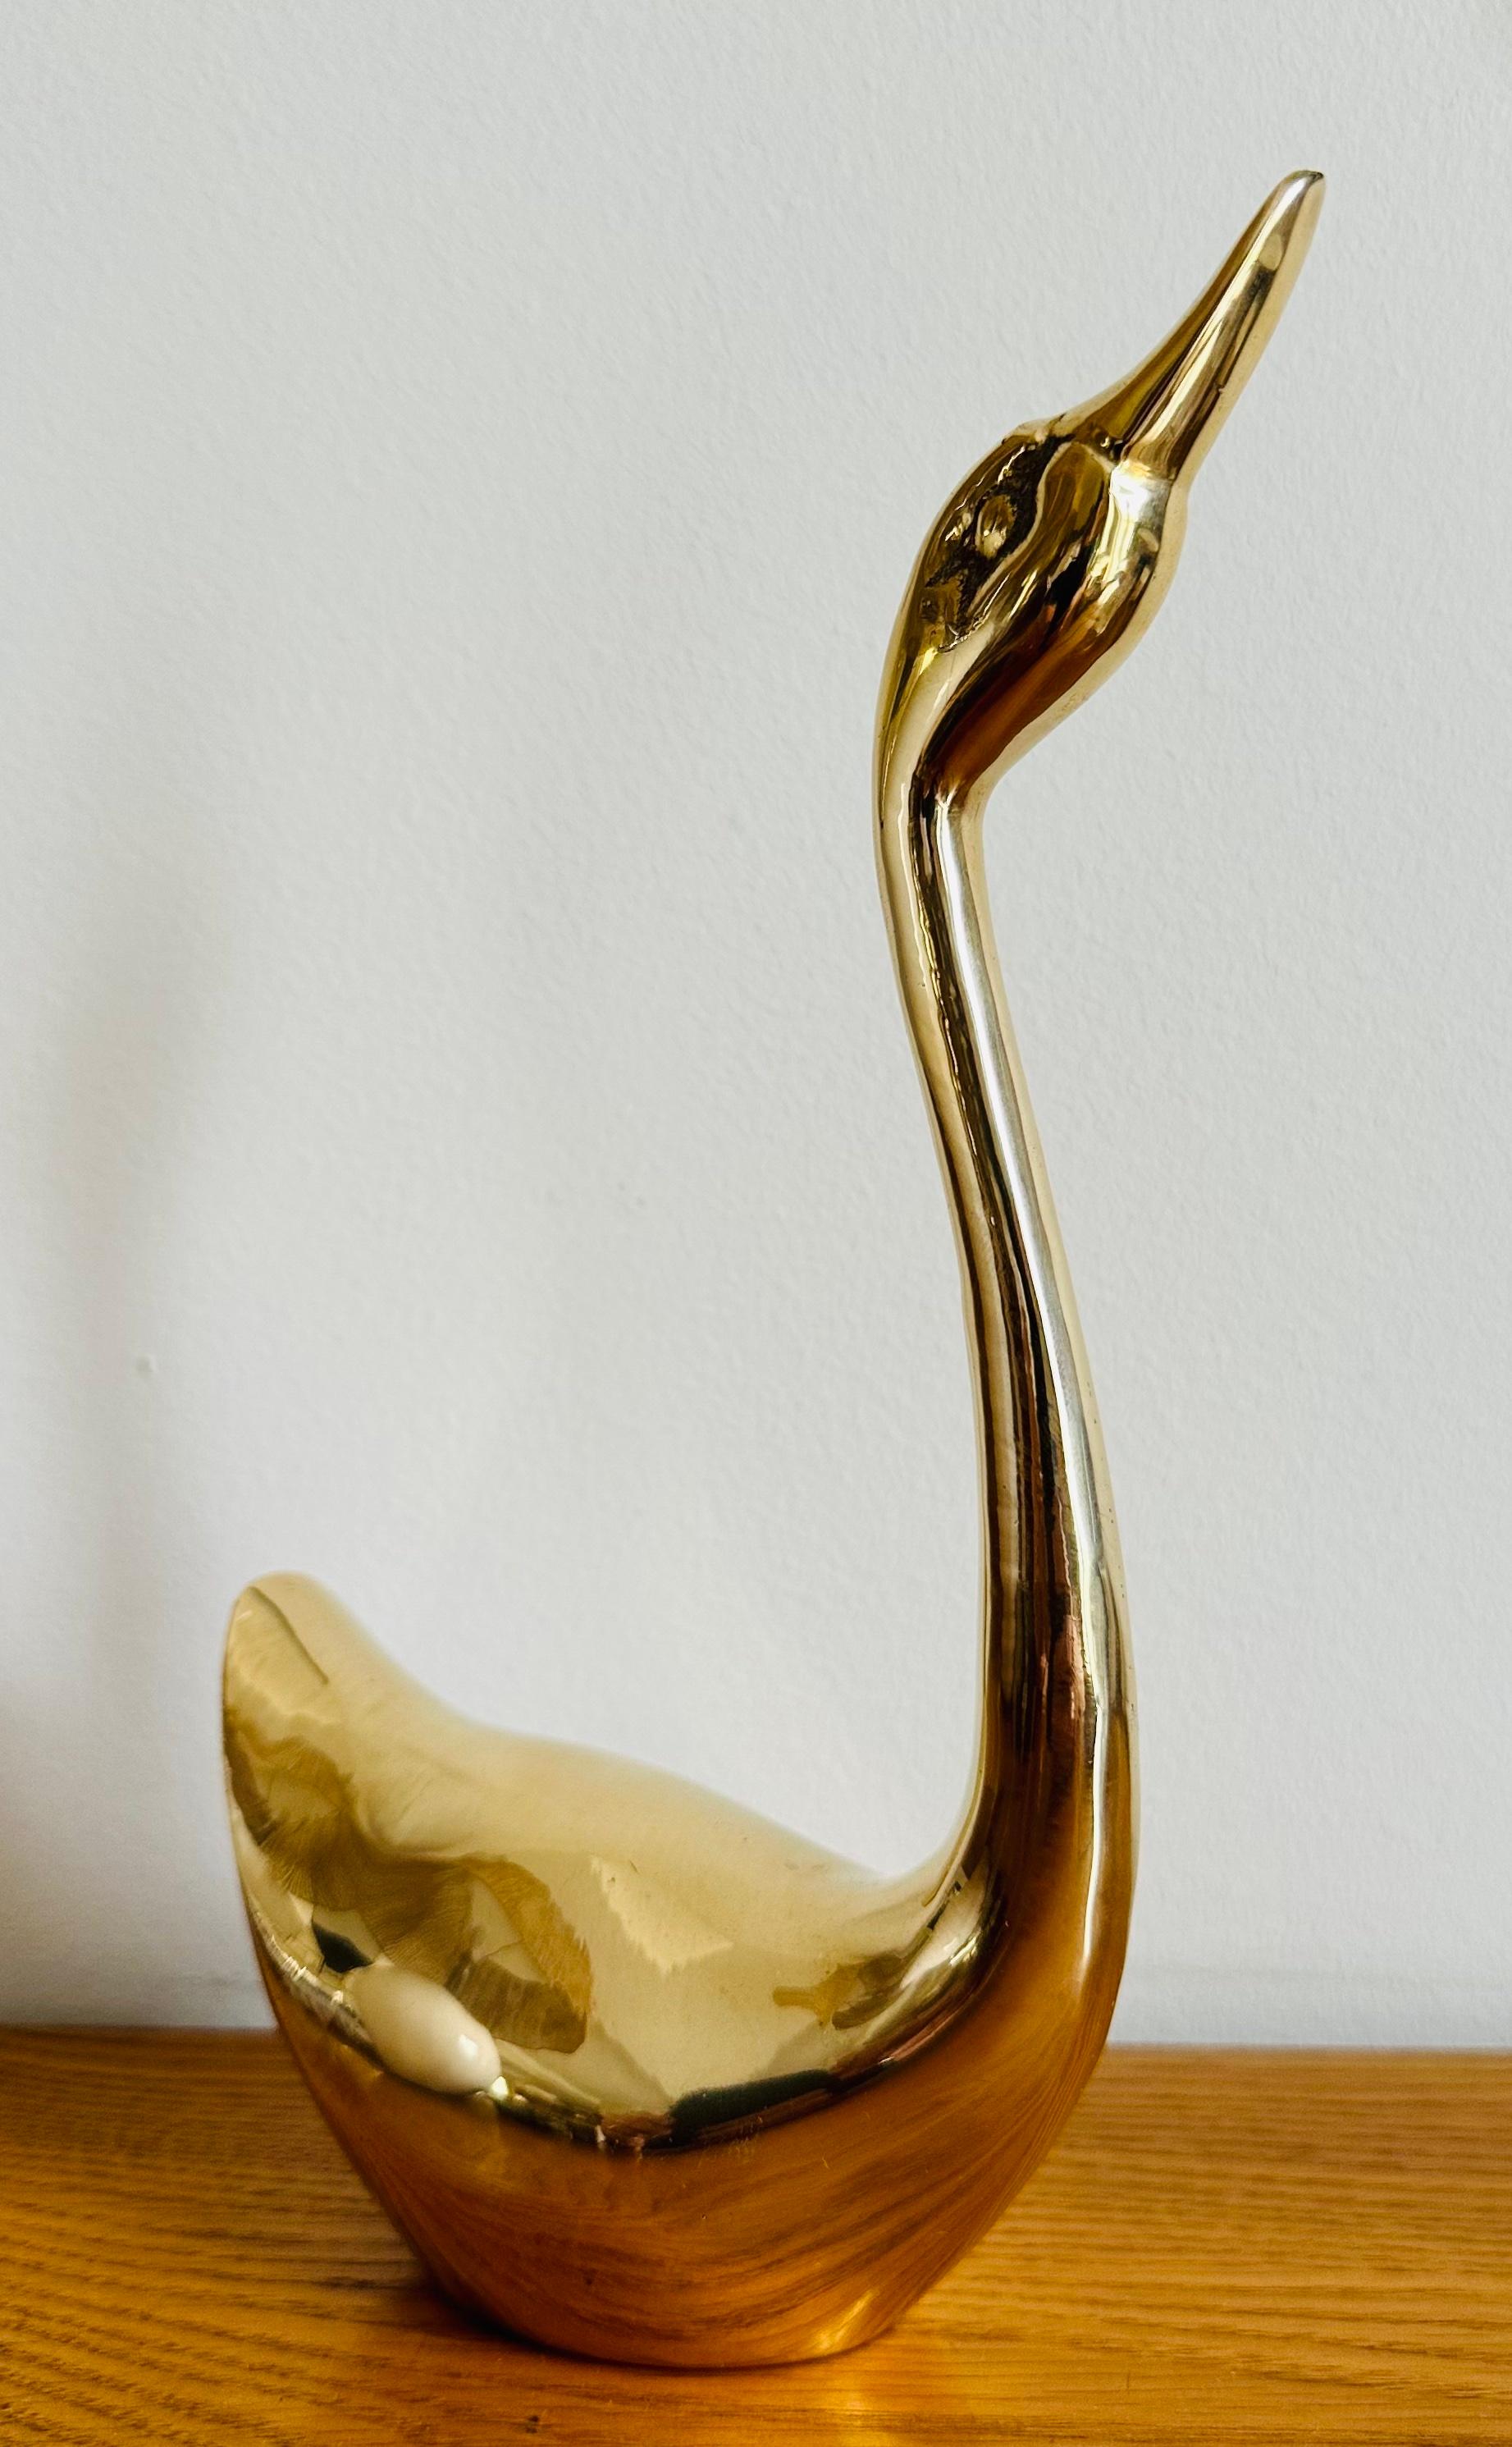 An elegant large vintage French 1970s decorative polished brass swan. In good vintage condition with a lovely patina. The swan has a couple of scratches which I've illustrated in the images. A small hole is in the base showing it's actually hollow